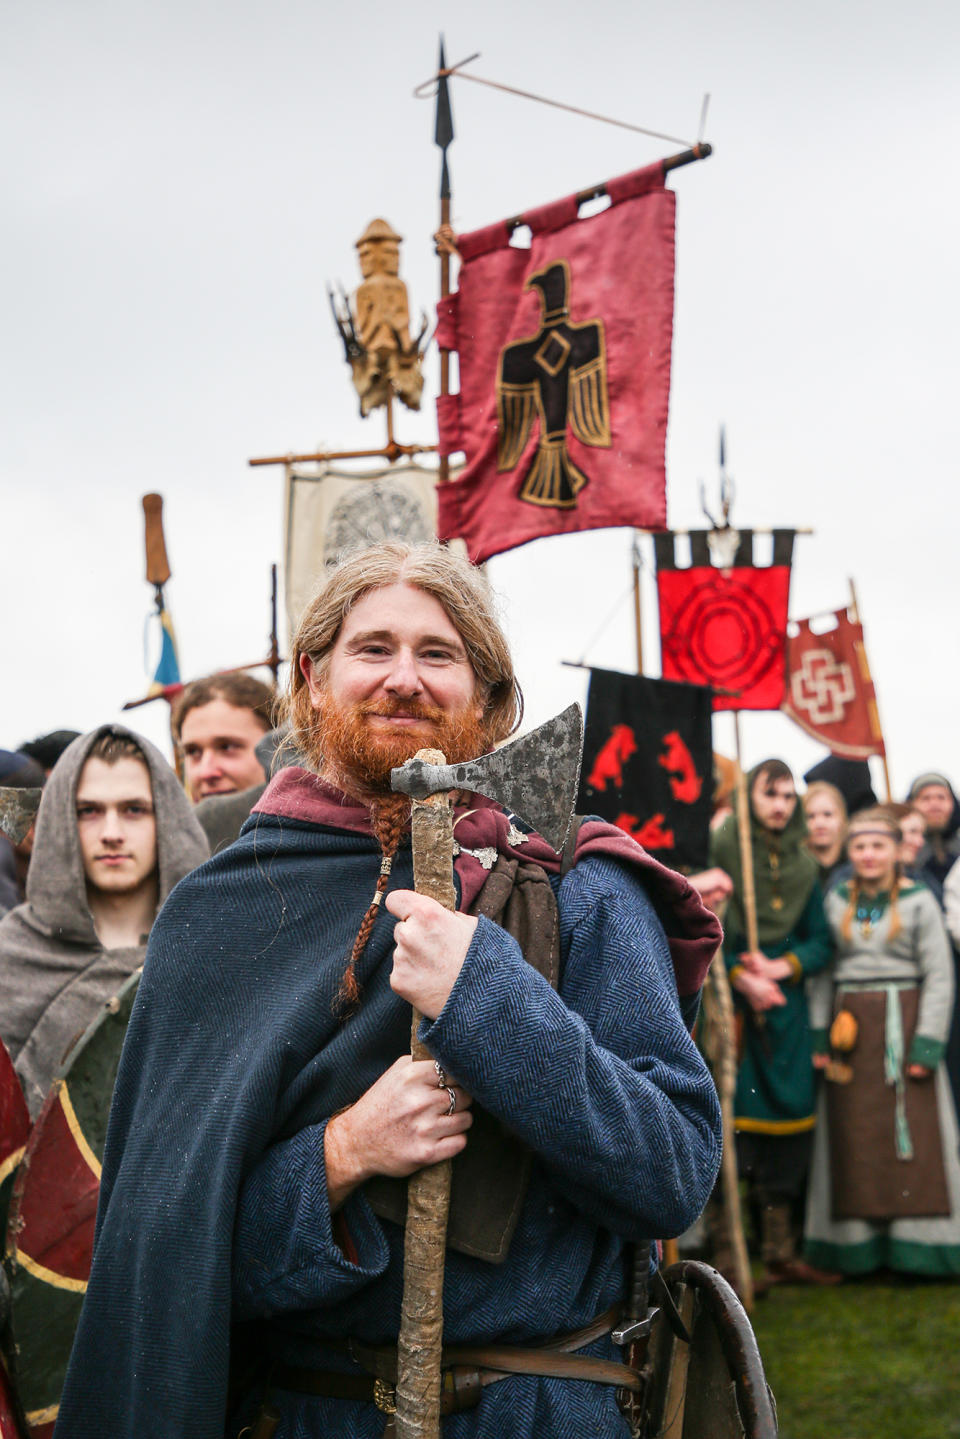 <p>On April 18, the Rekawka festival - which sees medieval reenactment groups come together - is held on the Krakus Mound in Krakow, Poland. </p>